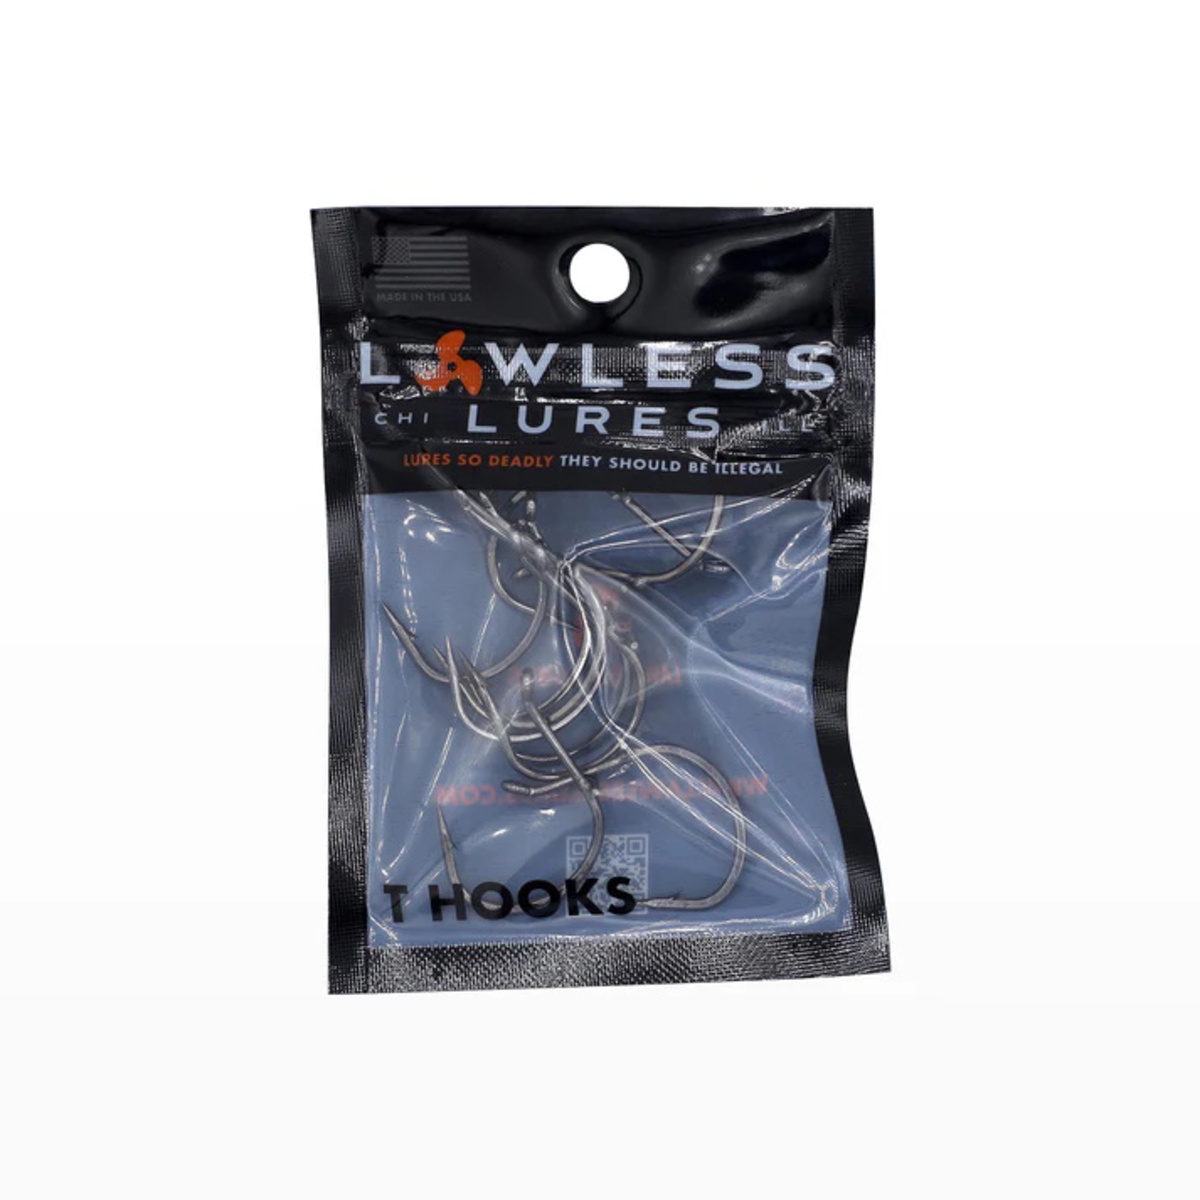 Recoil Lure Replacement T Hook Packs - Qty 10